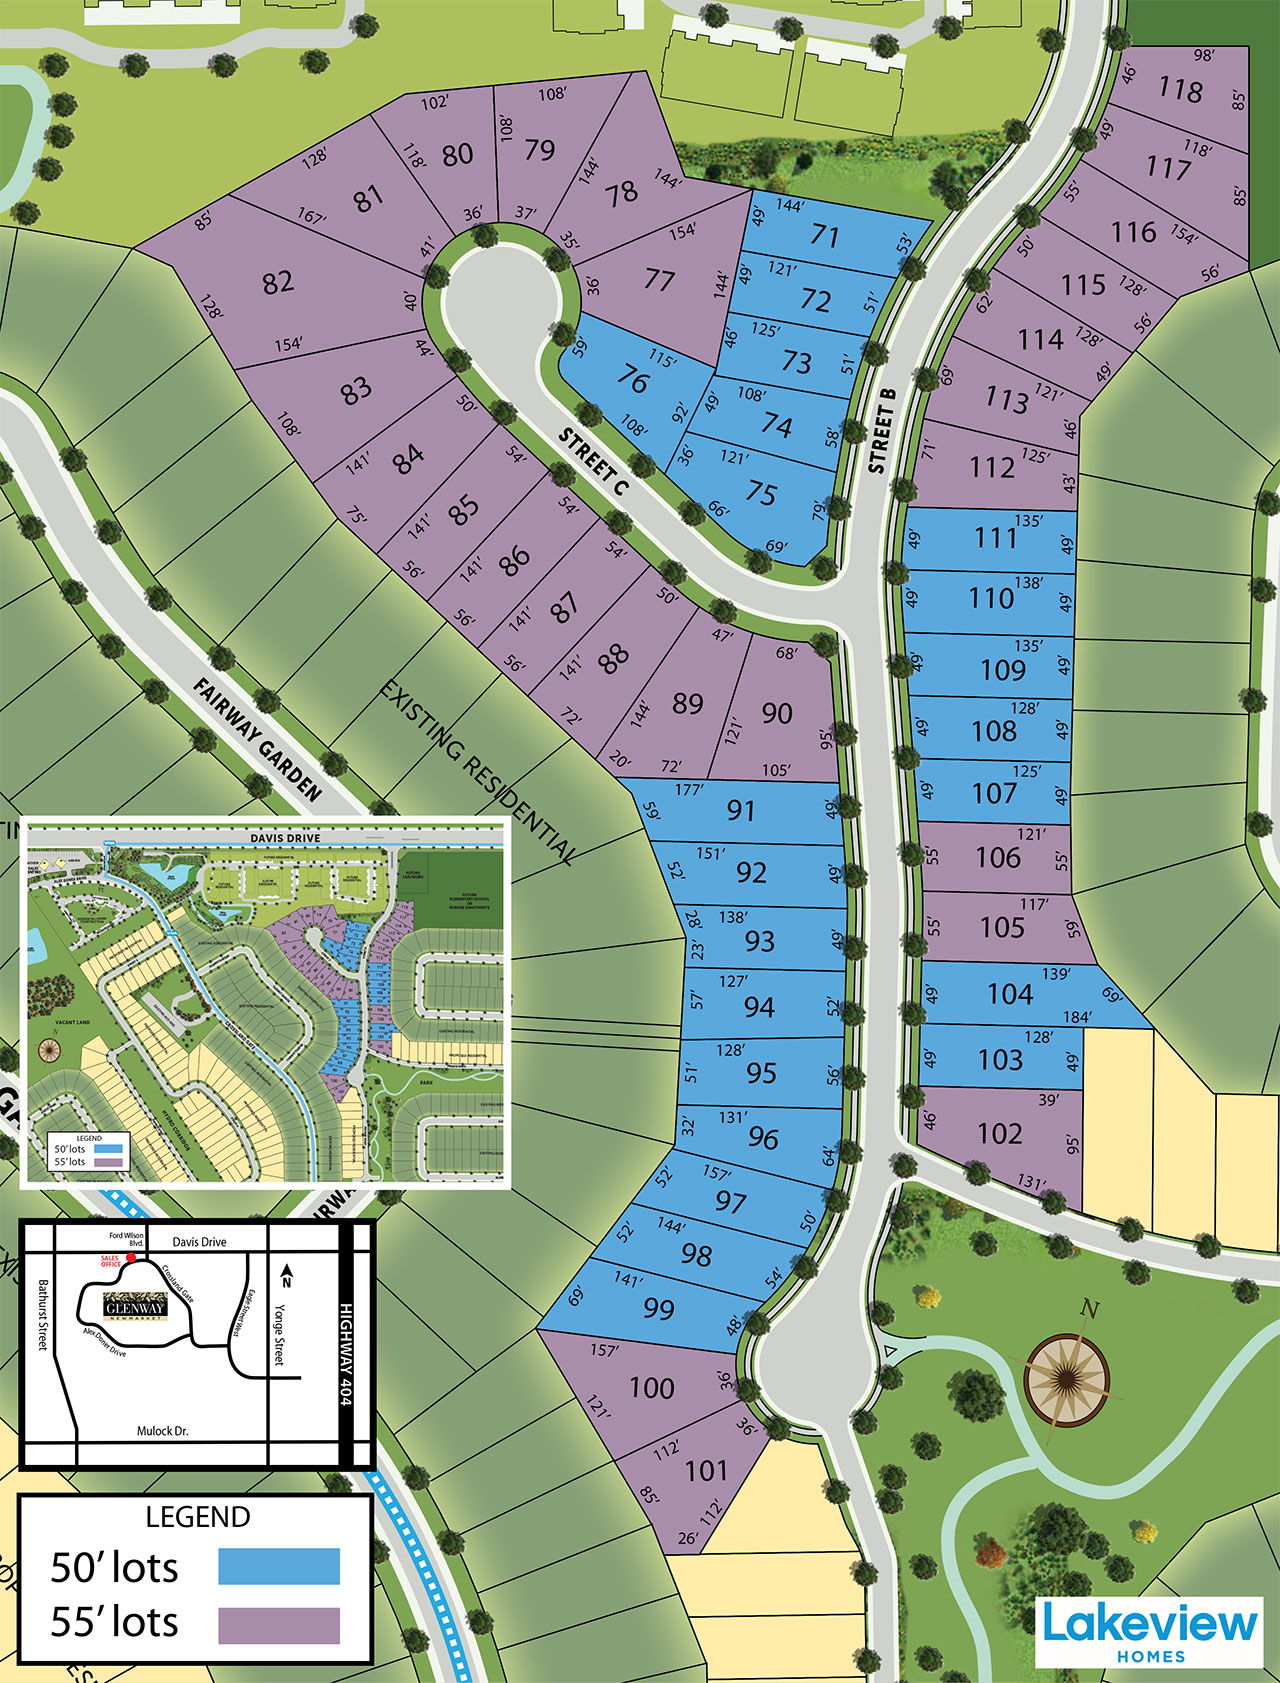 Site plan for Glenway (Lk) in Newmarket, Ontario